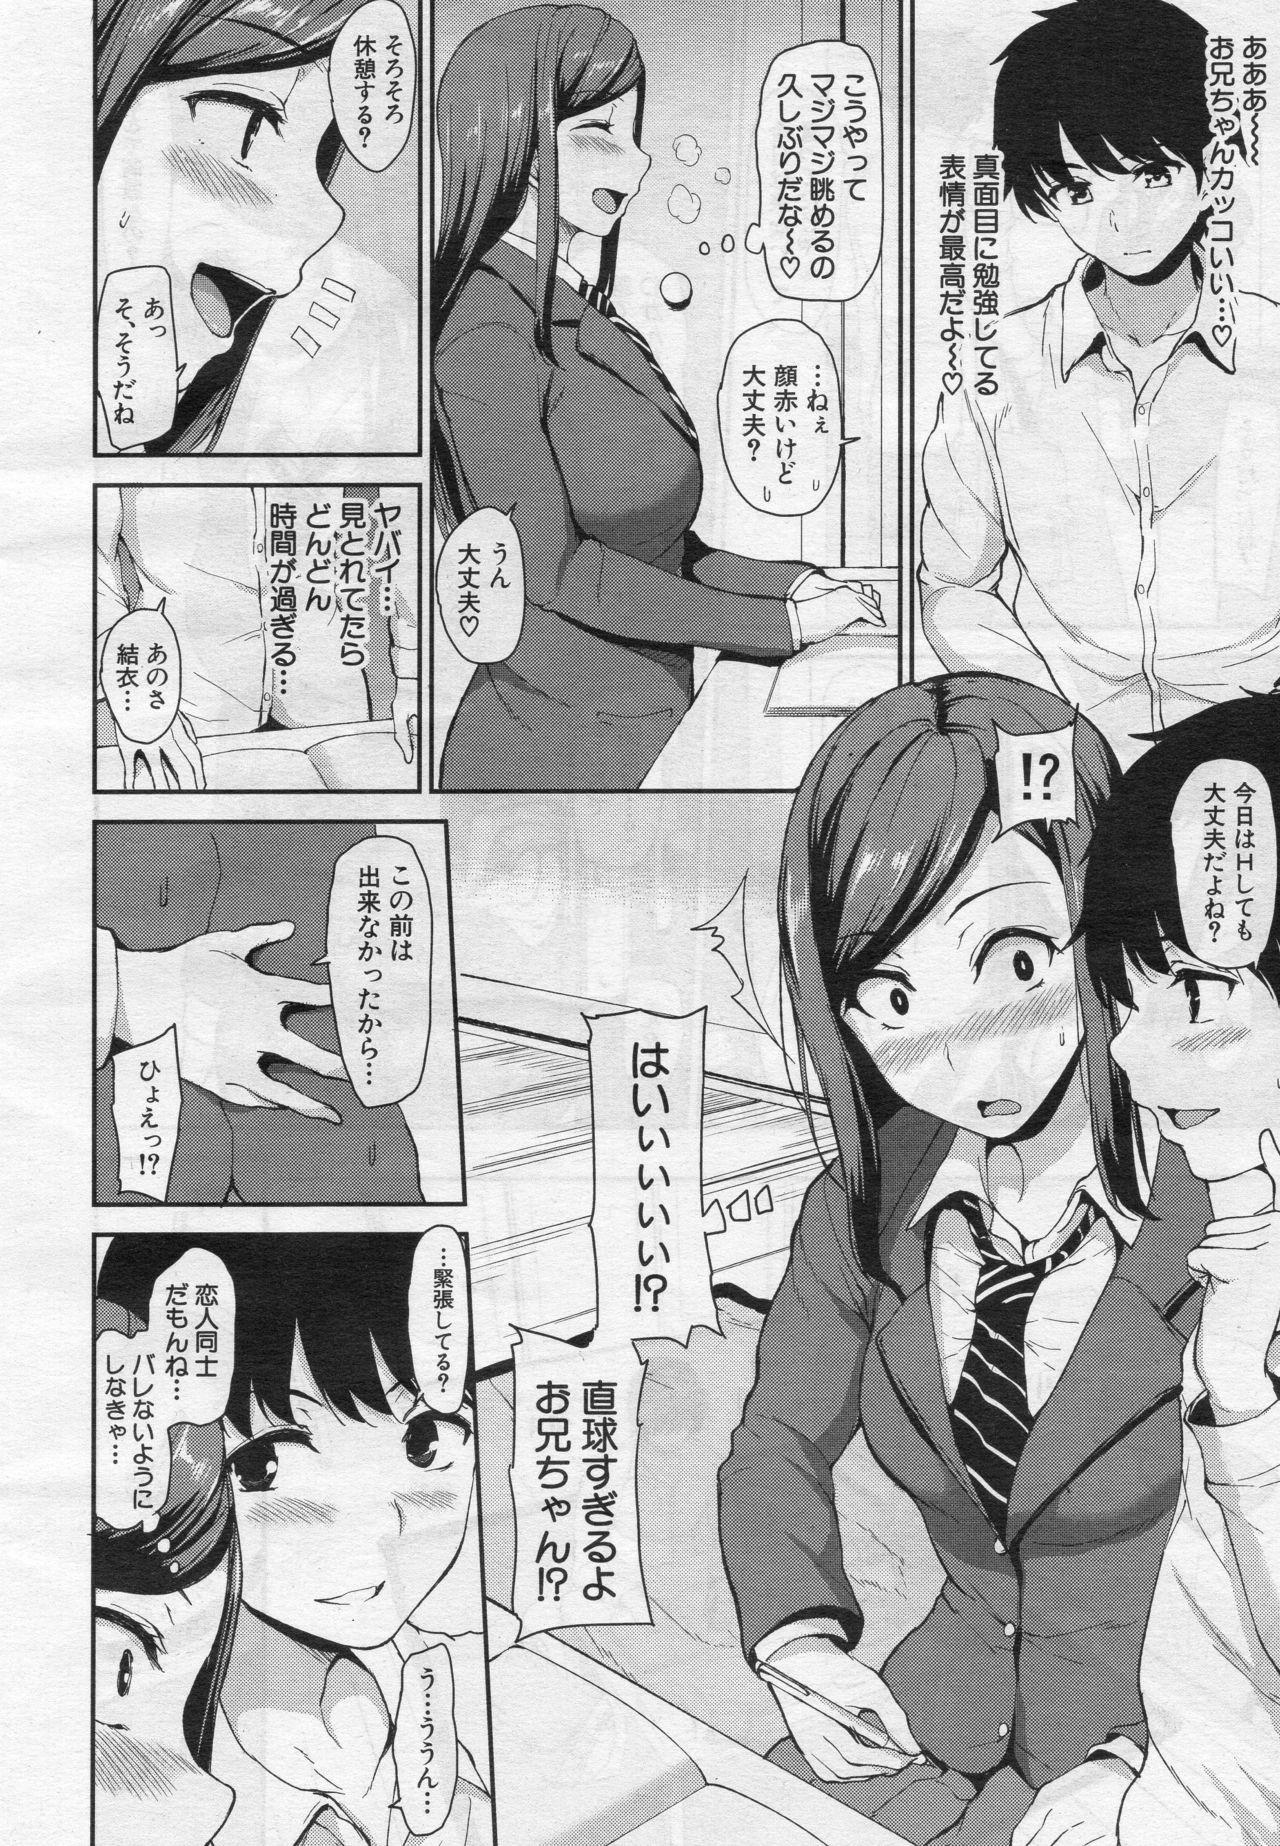 Forbidden Osananajimi to Imouto - A childhood friend and younger sister 18 Year Old - Page 10